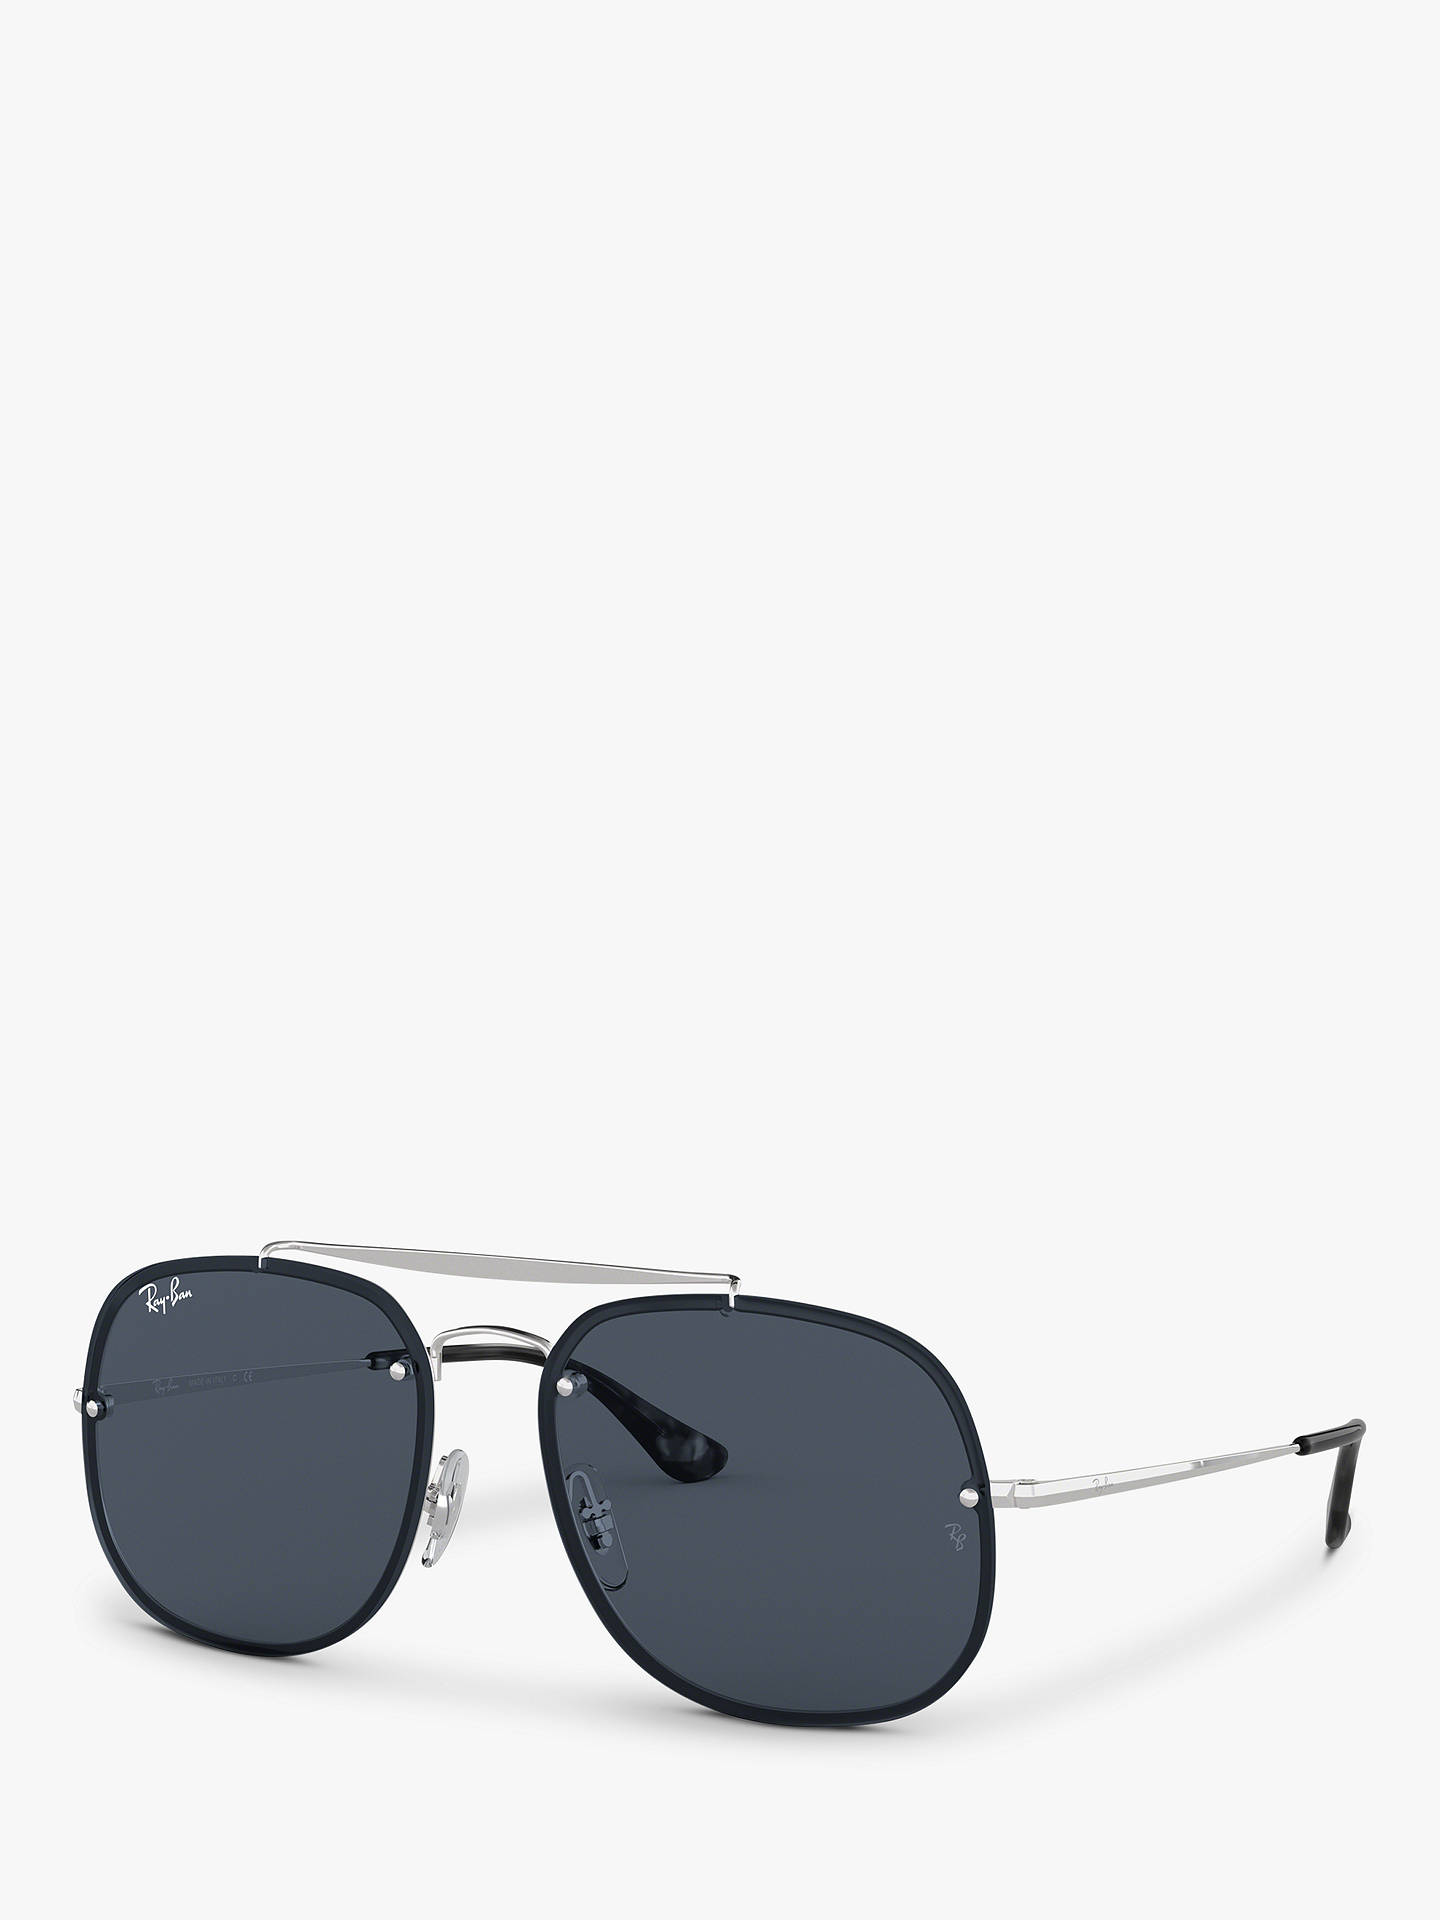 Ray-Ban RB3583N Unisex Blaze General Square Sunglasses, Silver/Grey at ...